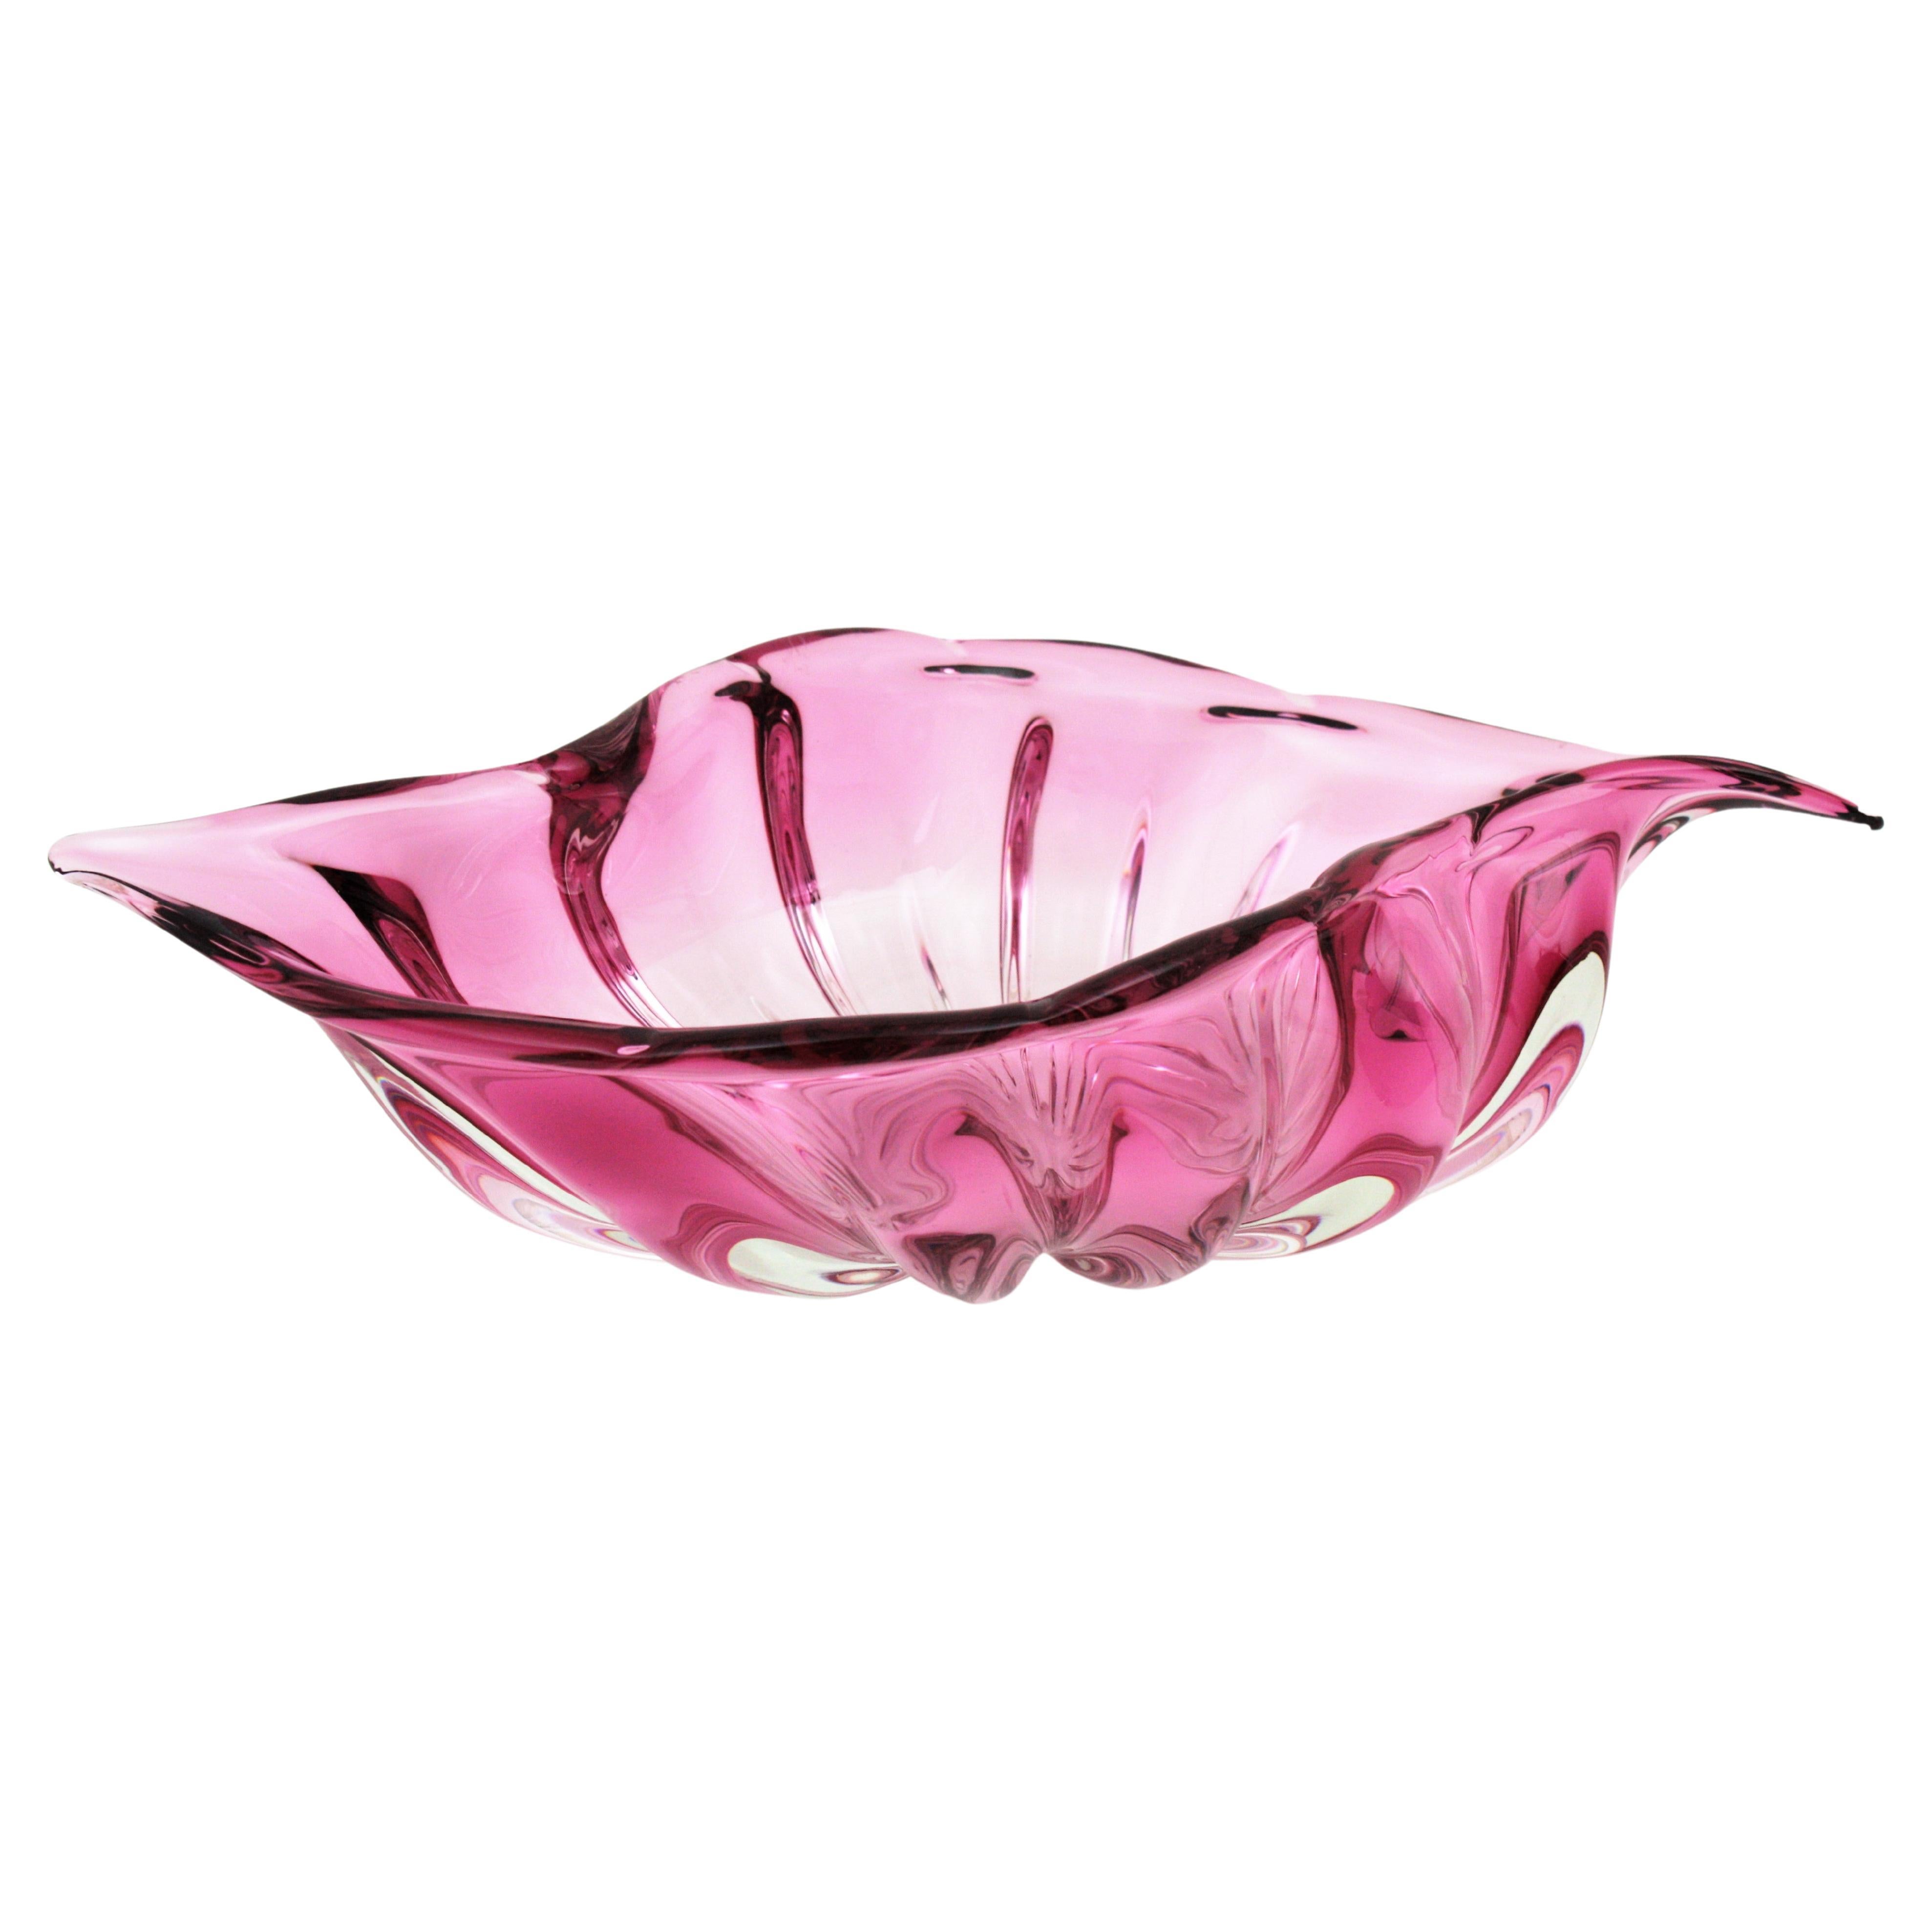 Barbini Murano Pink Shell Art Glass Centerpiece
Eye-catching extra large hand blown Sommerso pink Murano glass shell form ribbed bowl / centerpiece. Attributed to Alfredo Barbini, Italy, 1950-1960.
This exquisite pink Murano art glass seashell